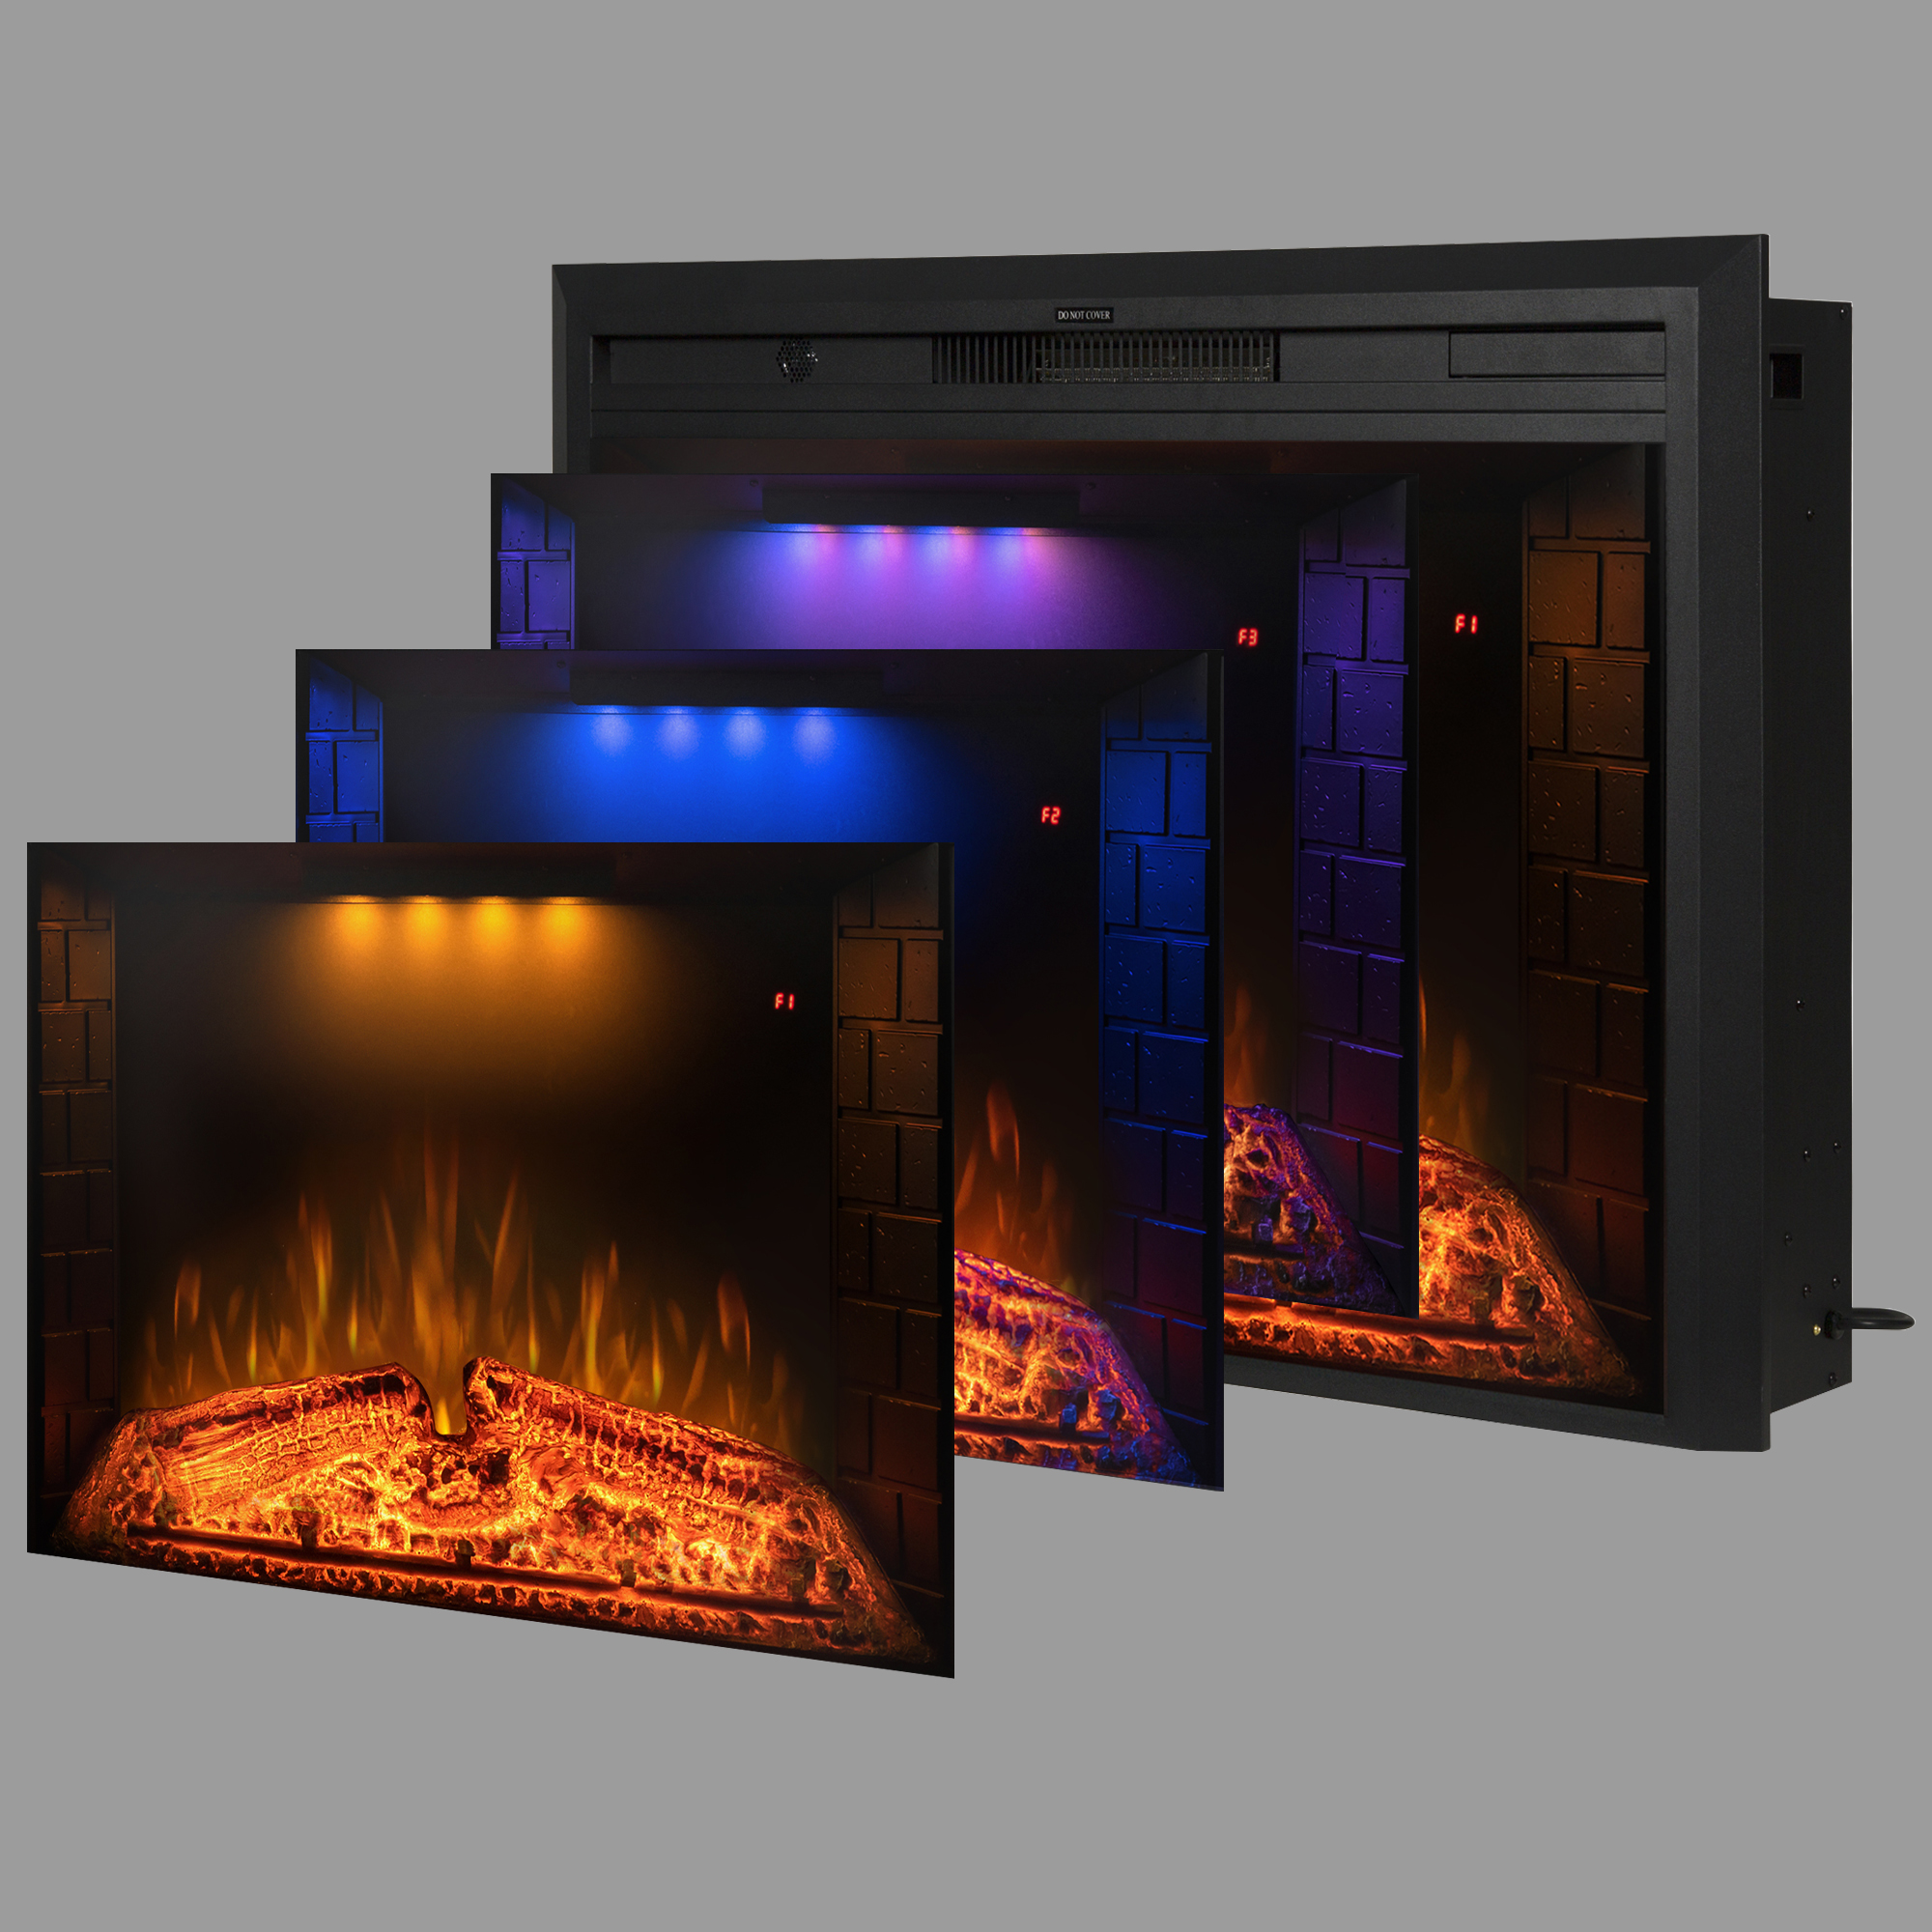 Valuxhome Electric Fireplace Inserts with Fire Crackling Sound, Adjustable Light & Flame Brightness